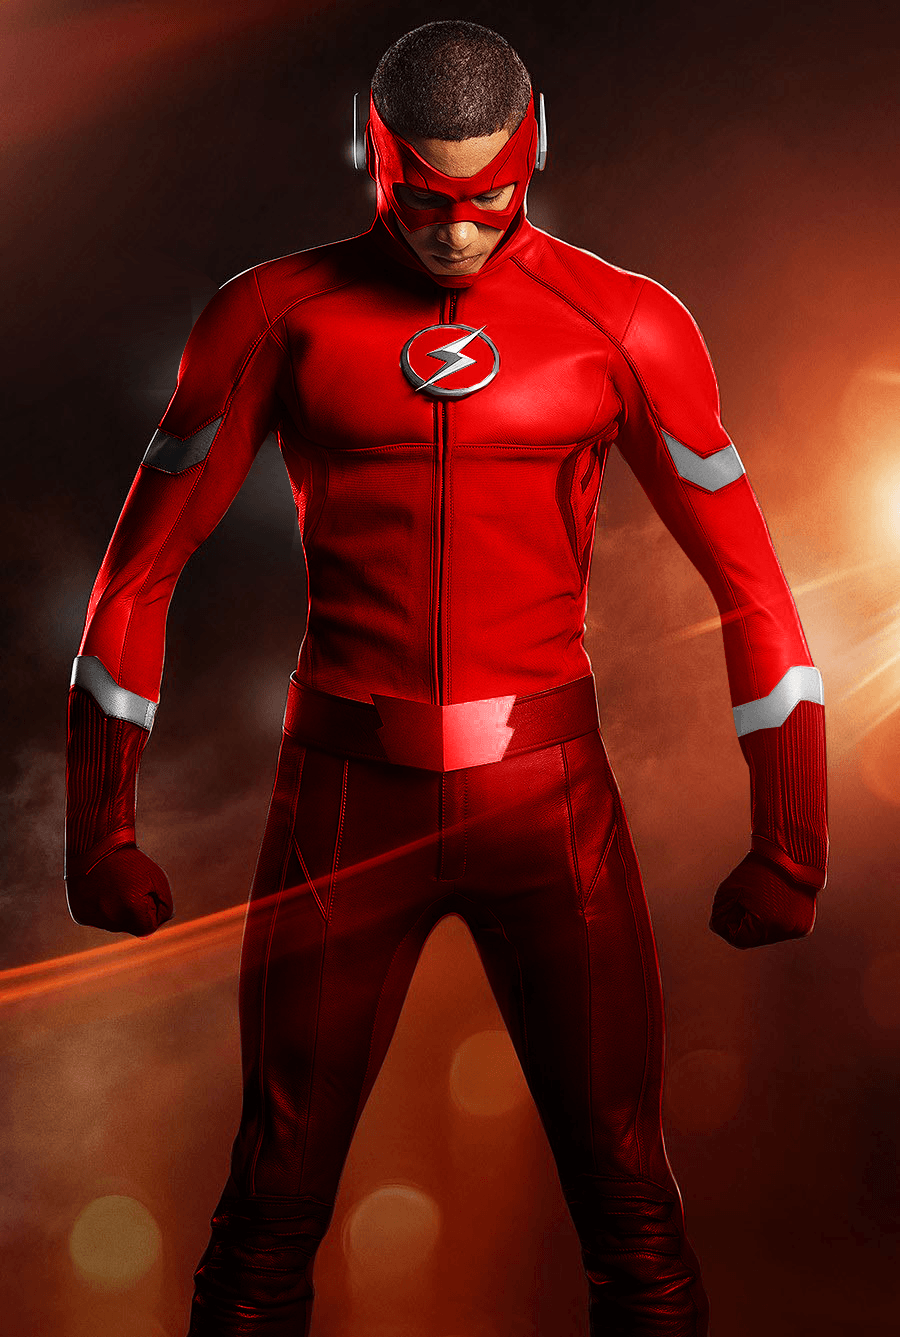 You Can't Catch Me Barry!